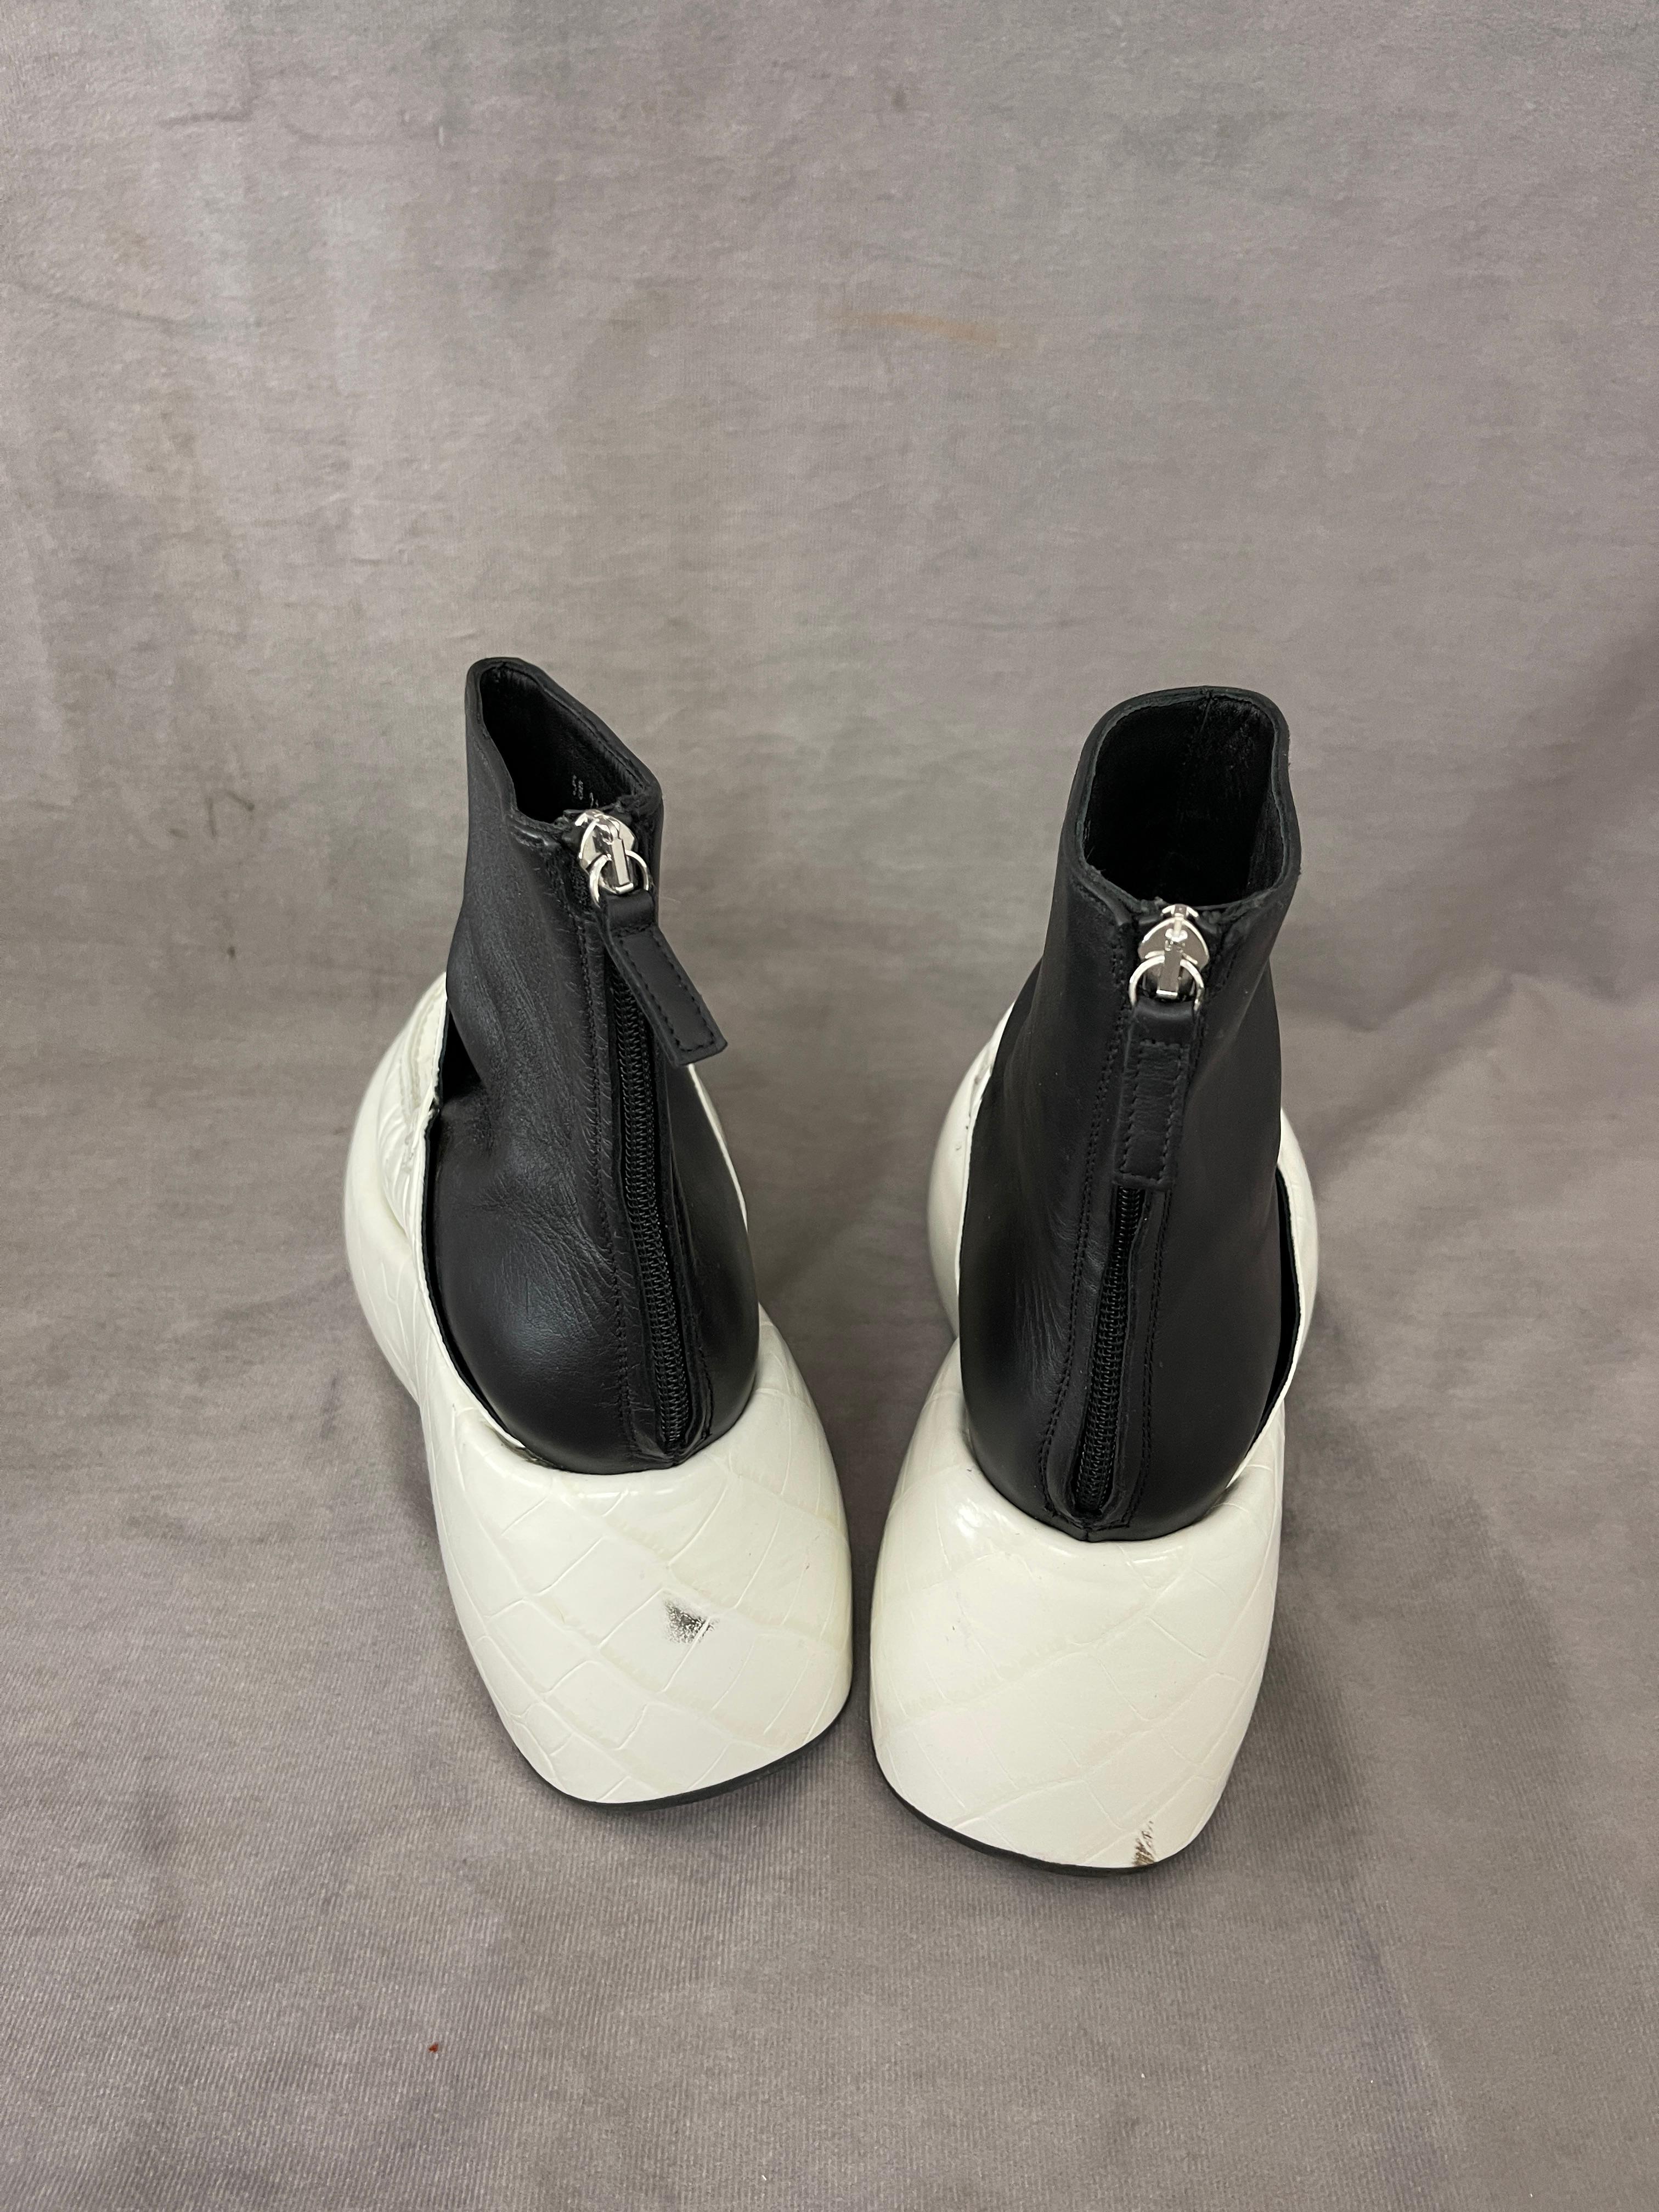 Loewe Black & White Wedge Loafer Boots Made in Italy